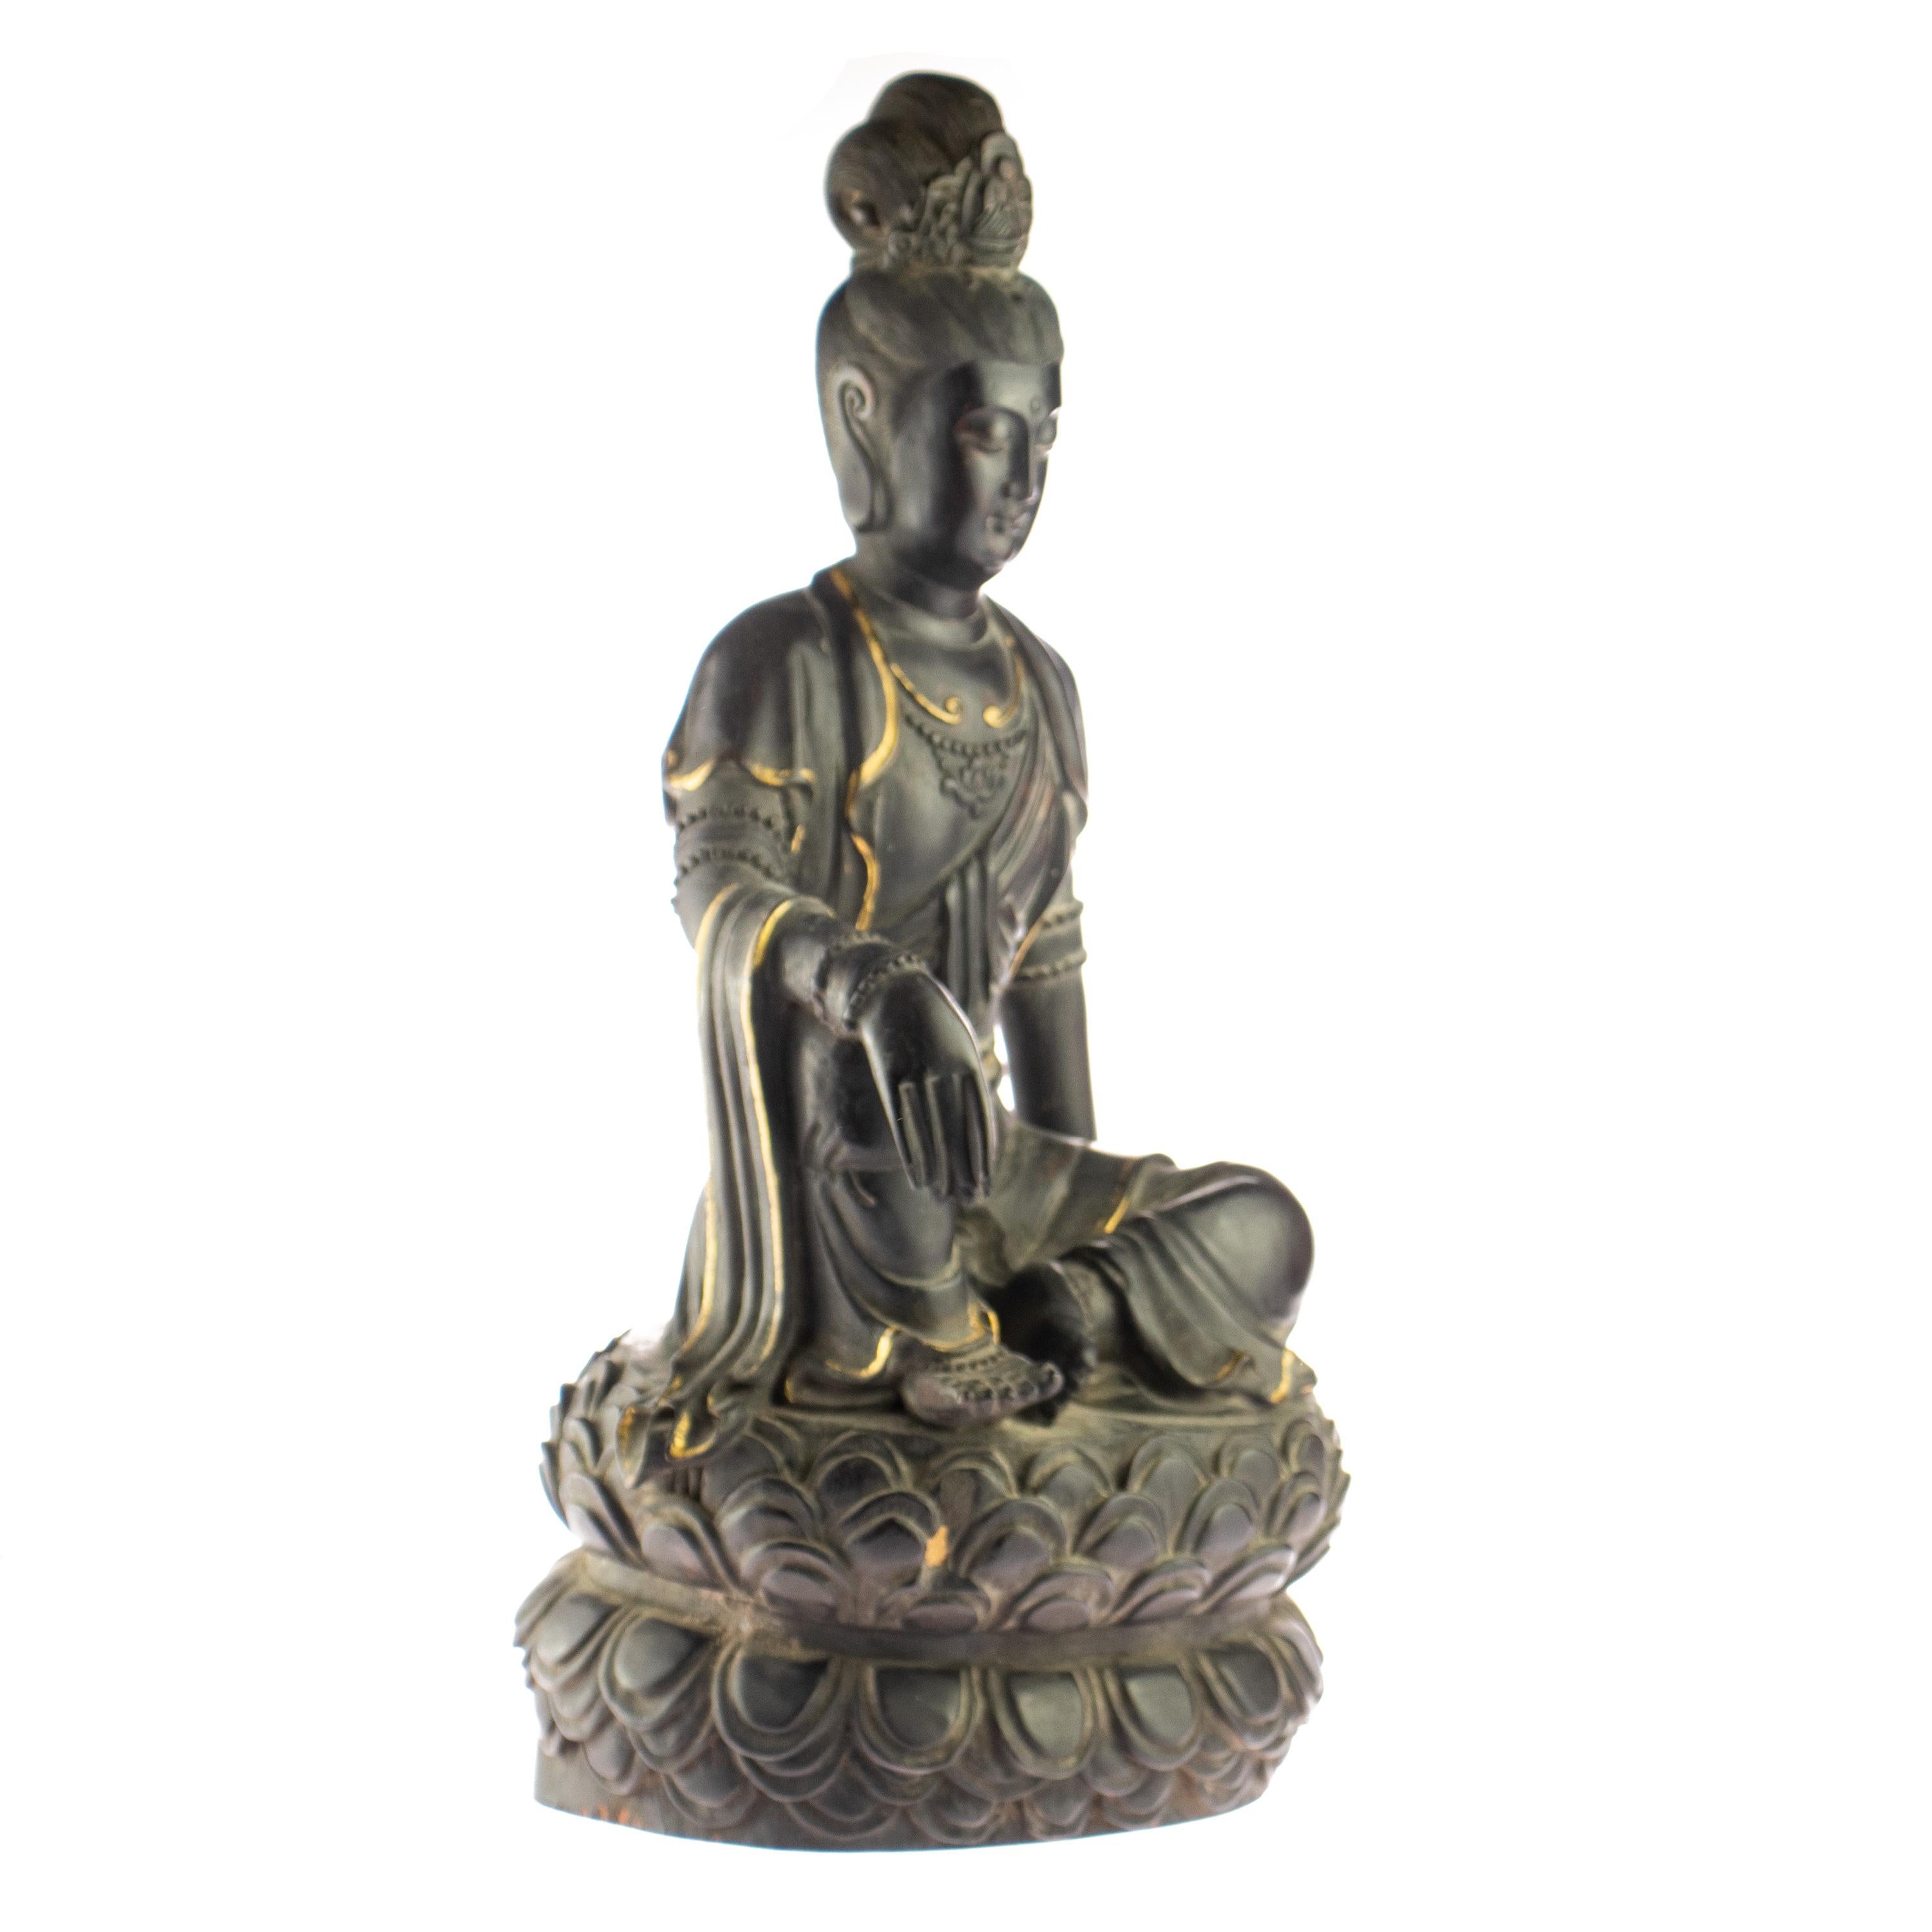 An antique and exceptional work of art dating back to the middle of the XXth century. A unique masterpiece, a legacy of the Chinese Craft of Wood Incision. A passionate piece of traditional Buddhist Chinese Art, handmade by local masters,